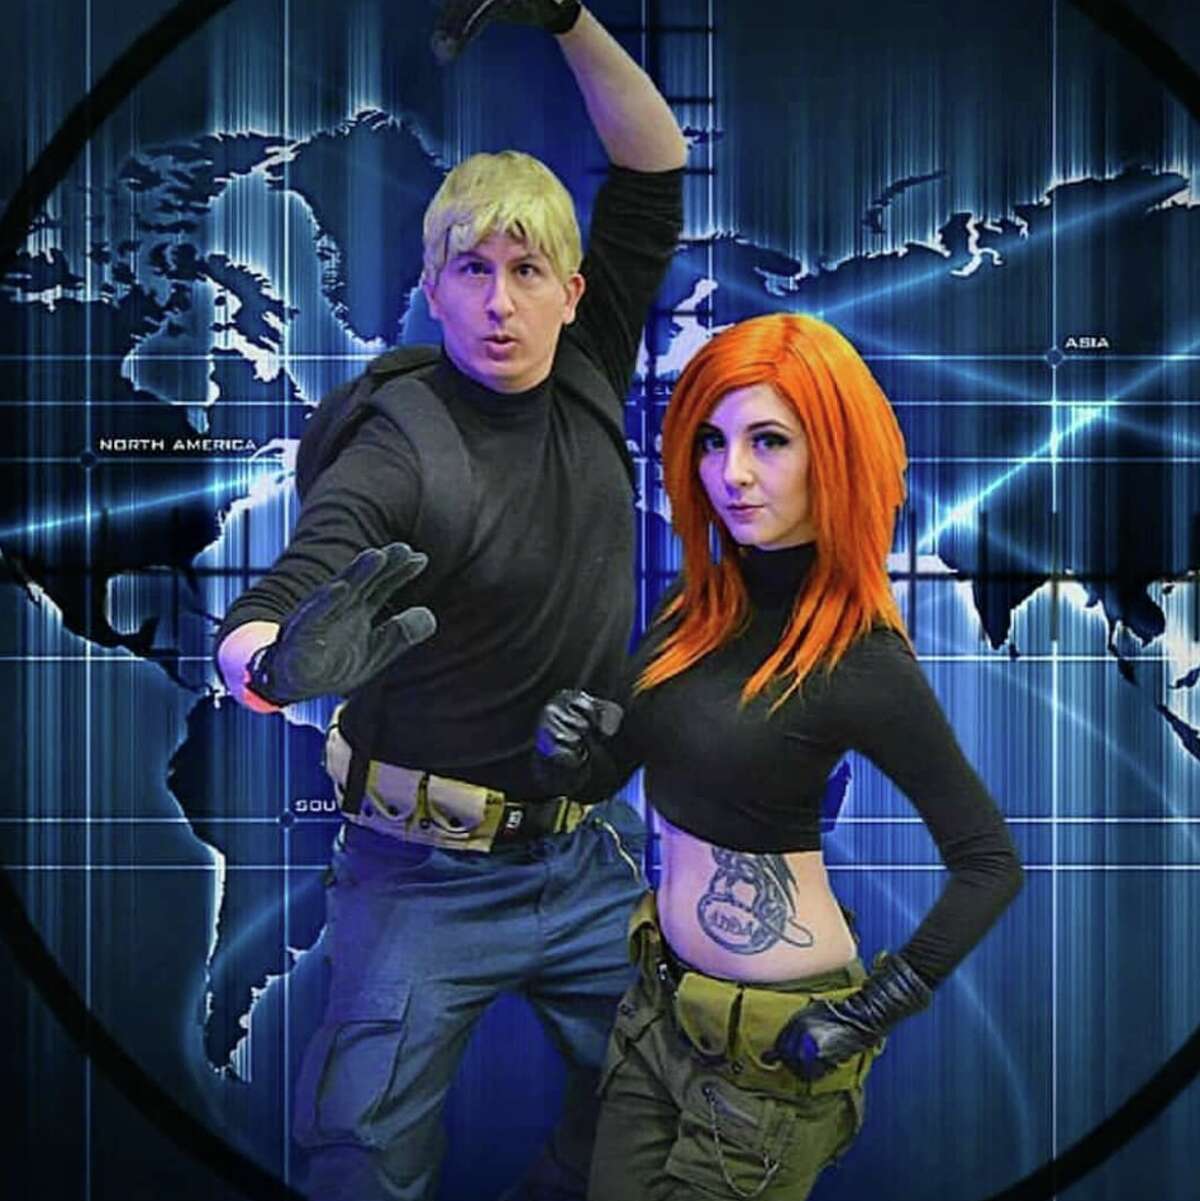 Josh Wilson shows off his Ron Stoppable next to his wife who takes the form of Kim Possible from Kim Possible.